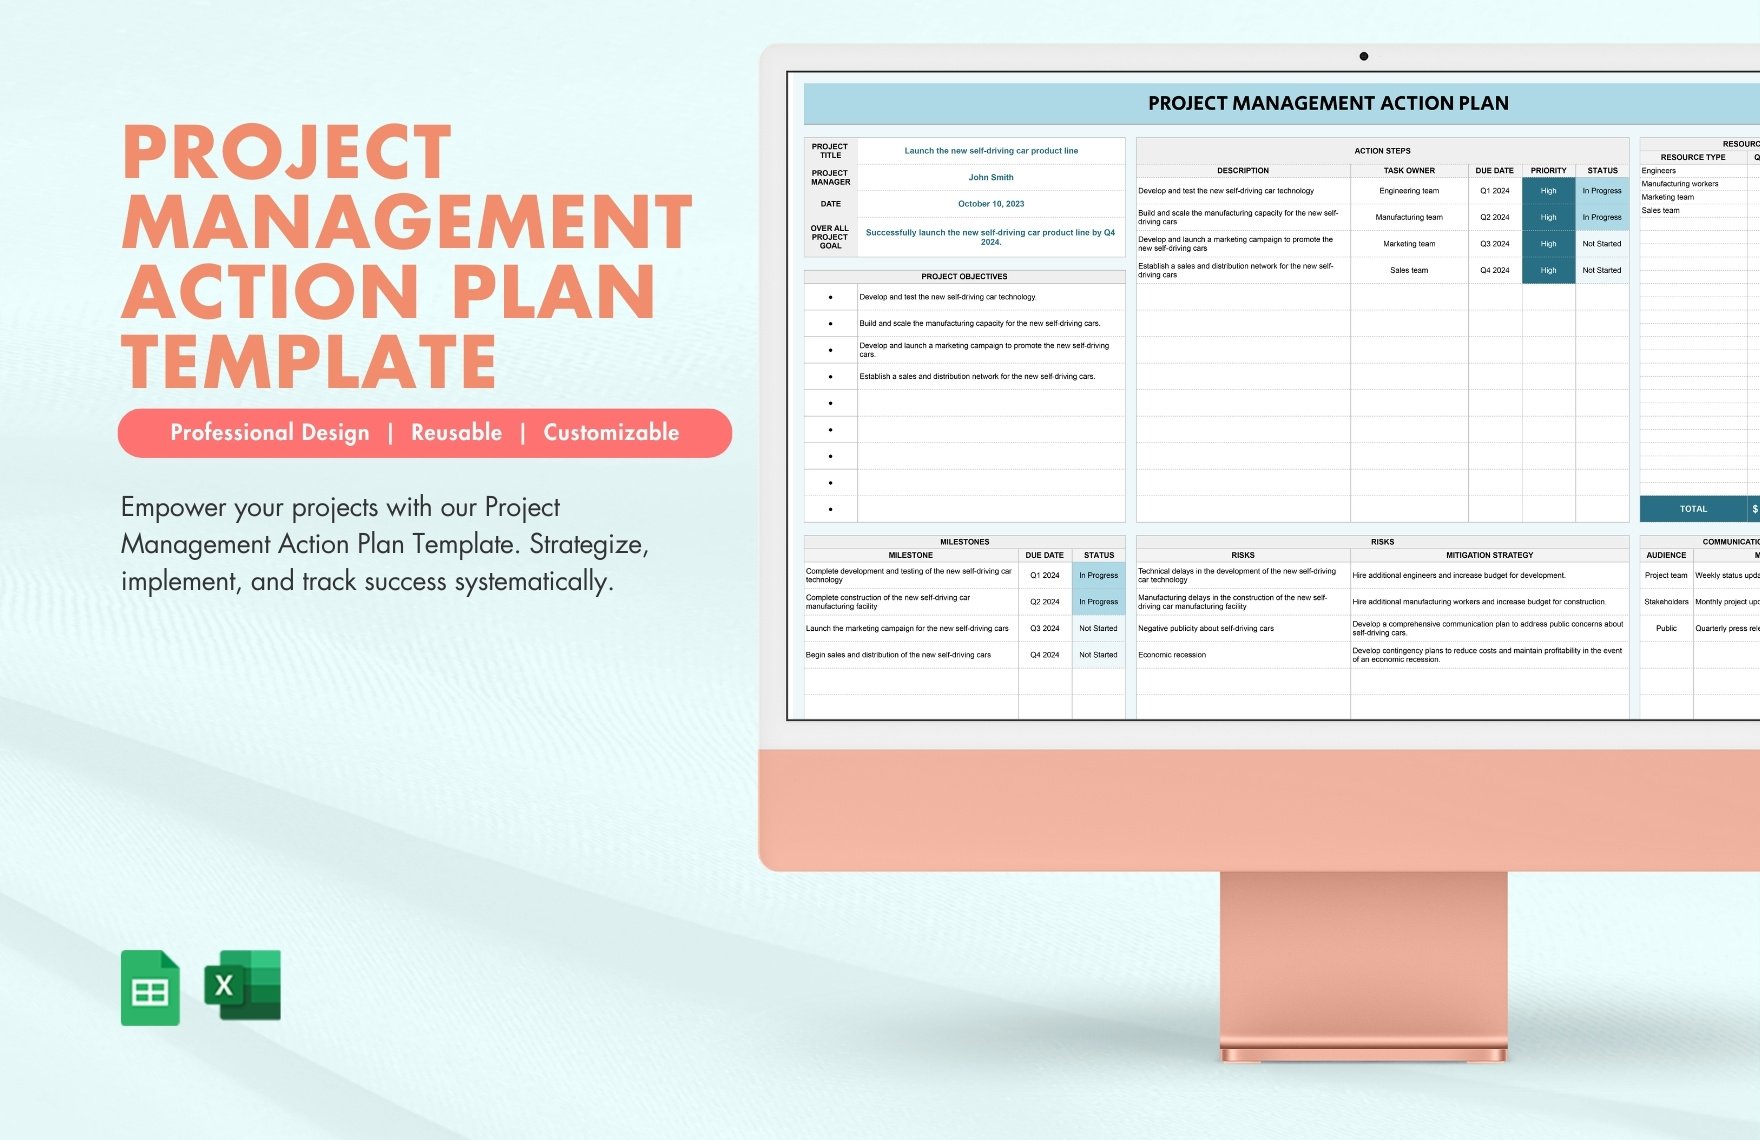 Project Management Template in Google Sheets - FREE Download | Template.net